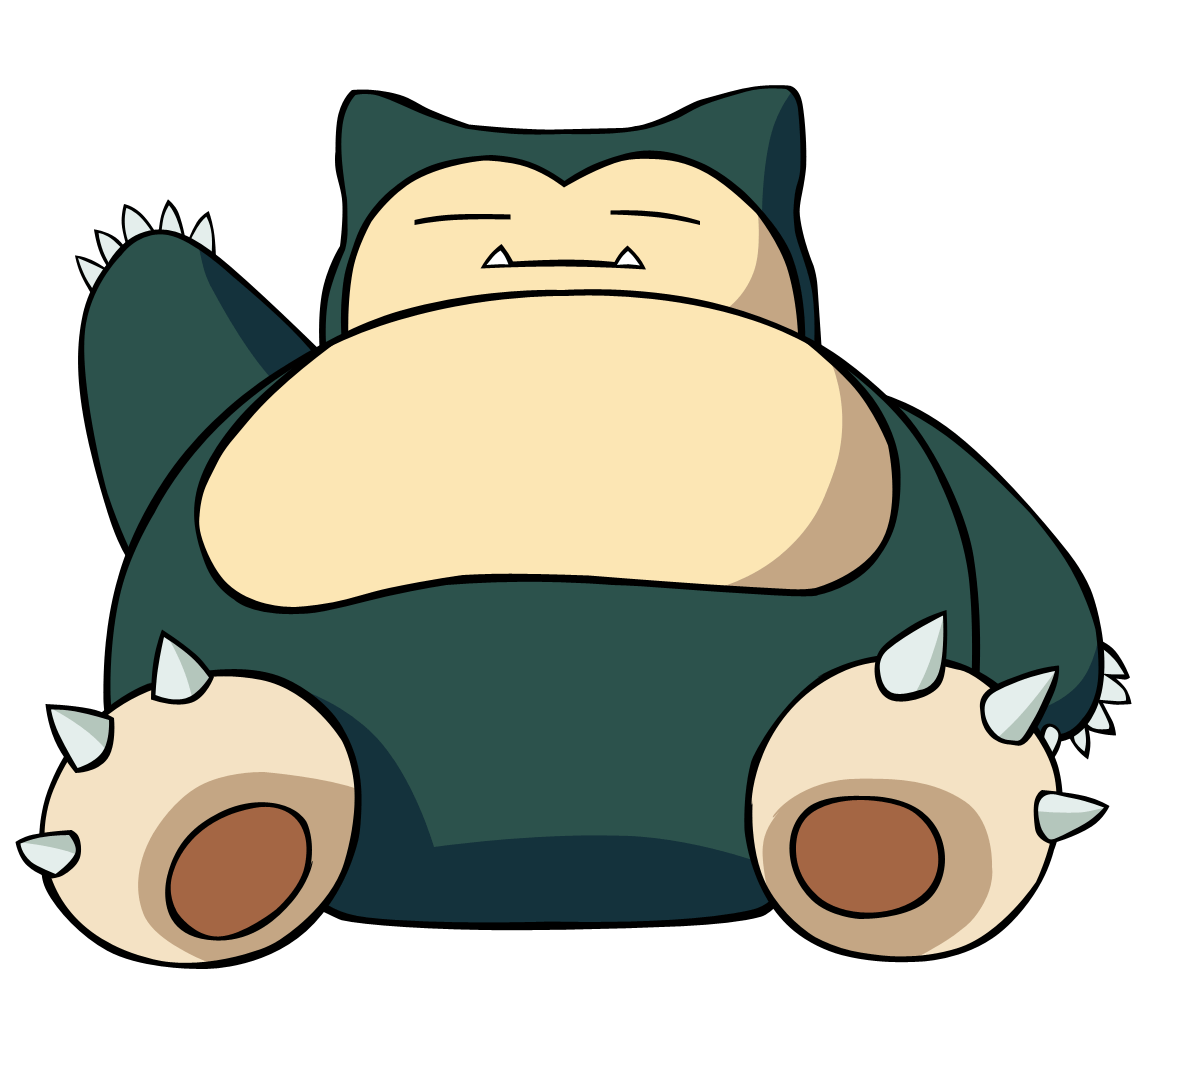 snorlax Image Search Results. football party